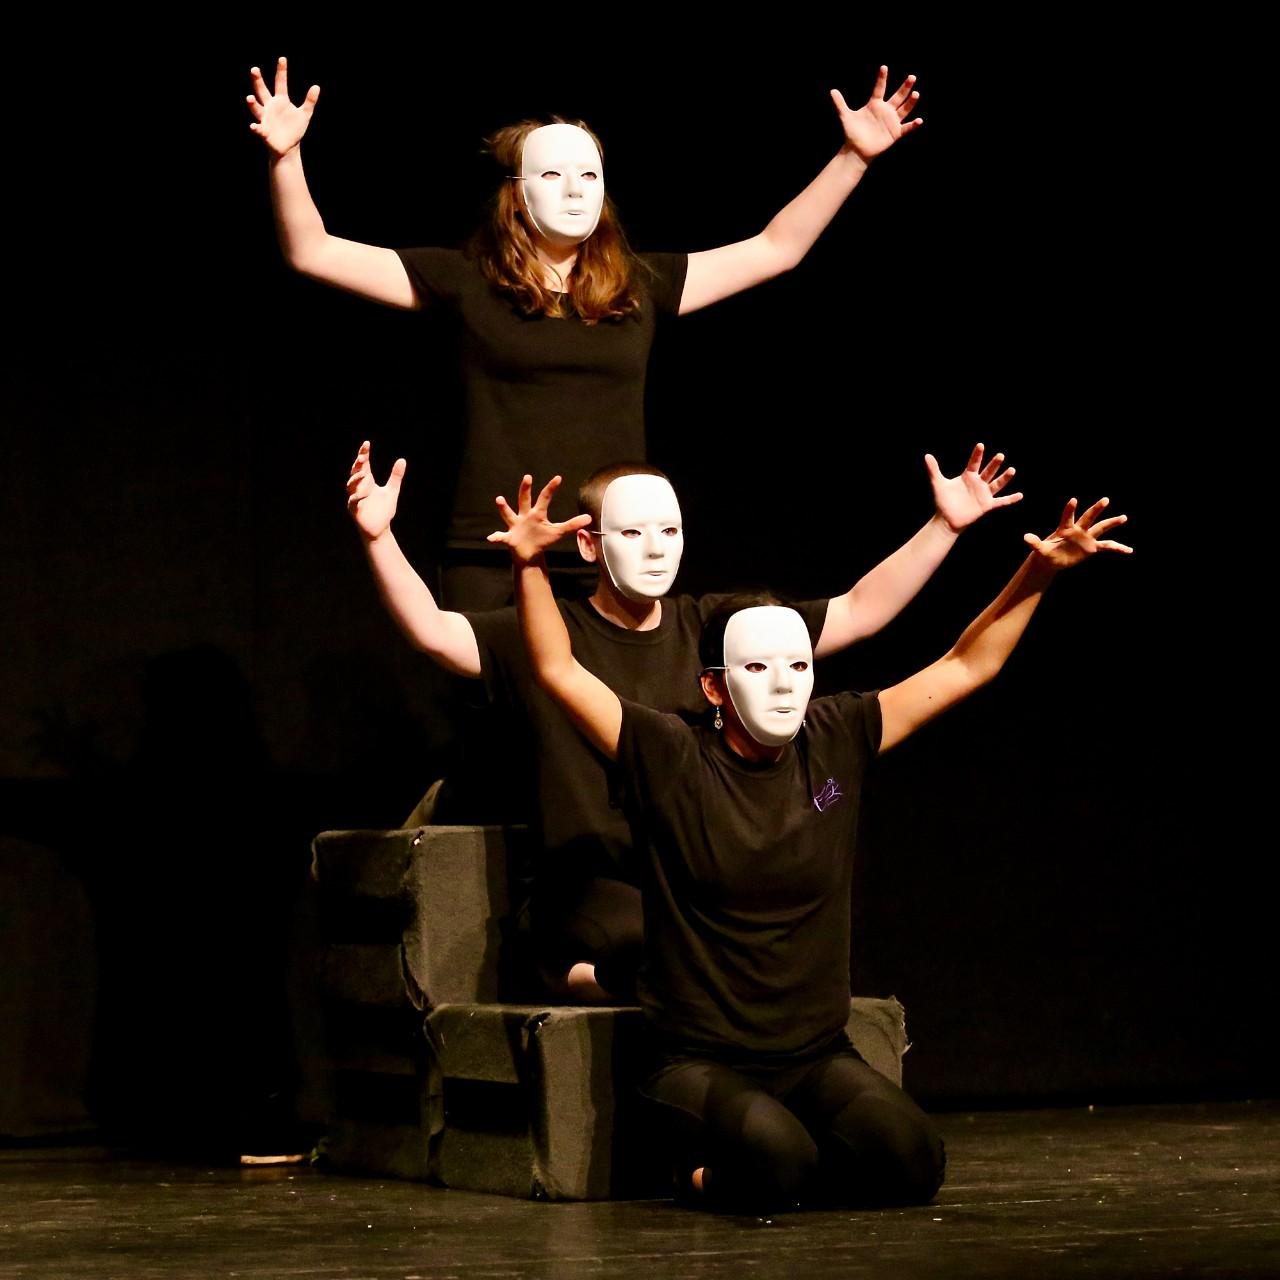 3 students one behind the other with arms outstretched wearing white masks 